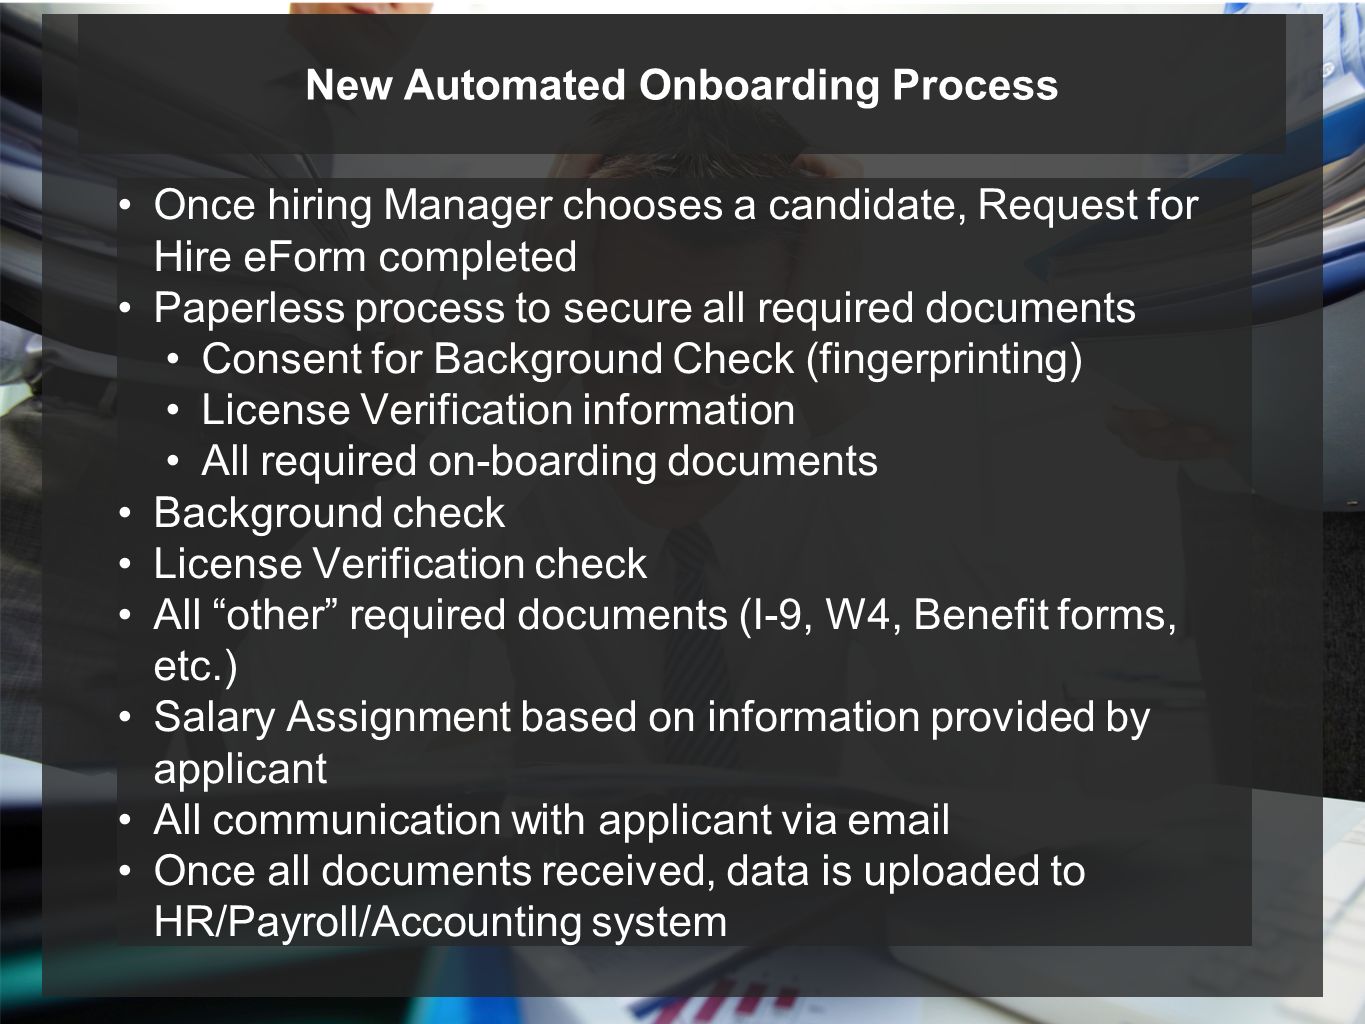 Once hiring Manager chooses a candidate, Request for Hire eForm completed Paperless process to secure all required documents Consent for Background Check (fingerprinting) License Verification information All required on-boarding documents Background check License Verification check All other required documents (I-9, W4, Benefit forms, etc.) Salary Assignment based on information provided by applicant All communication with applicant via  Once all documents received, data is uploaded to HR/Payroll/Accounting system New Automated Onboarding Process